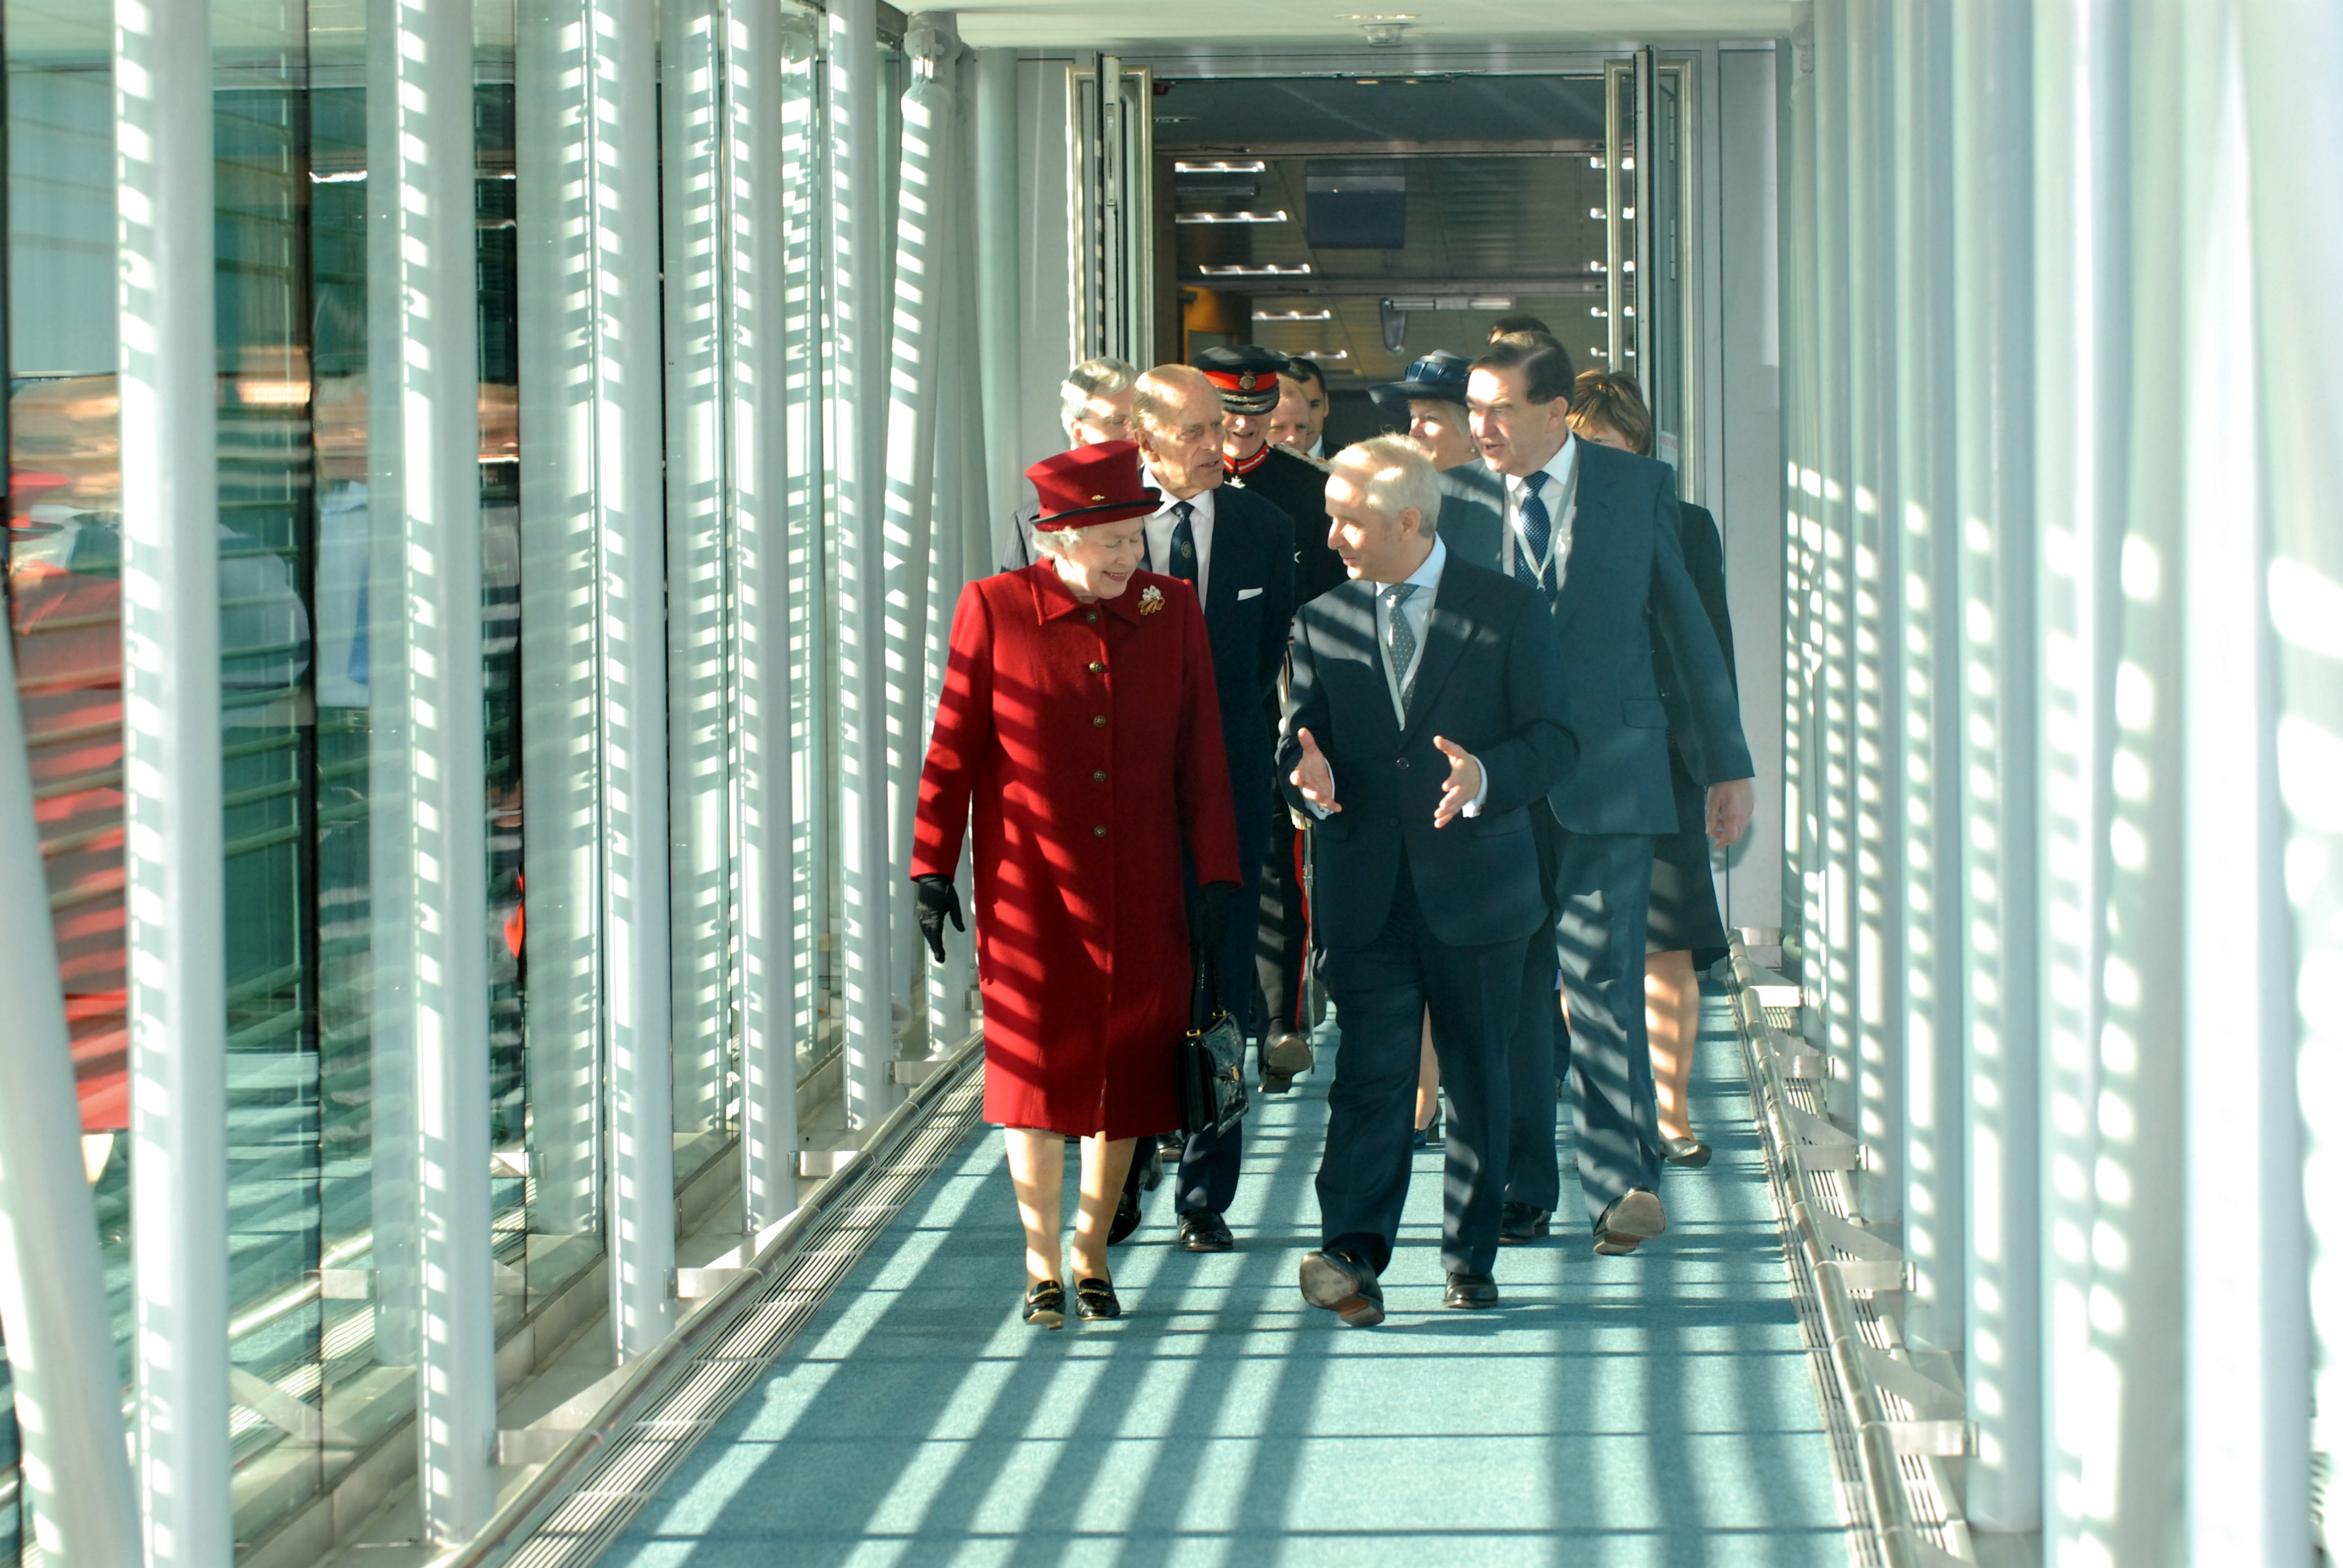 HM Queen Elizabeth II during her tour of the facility in 2007